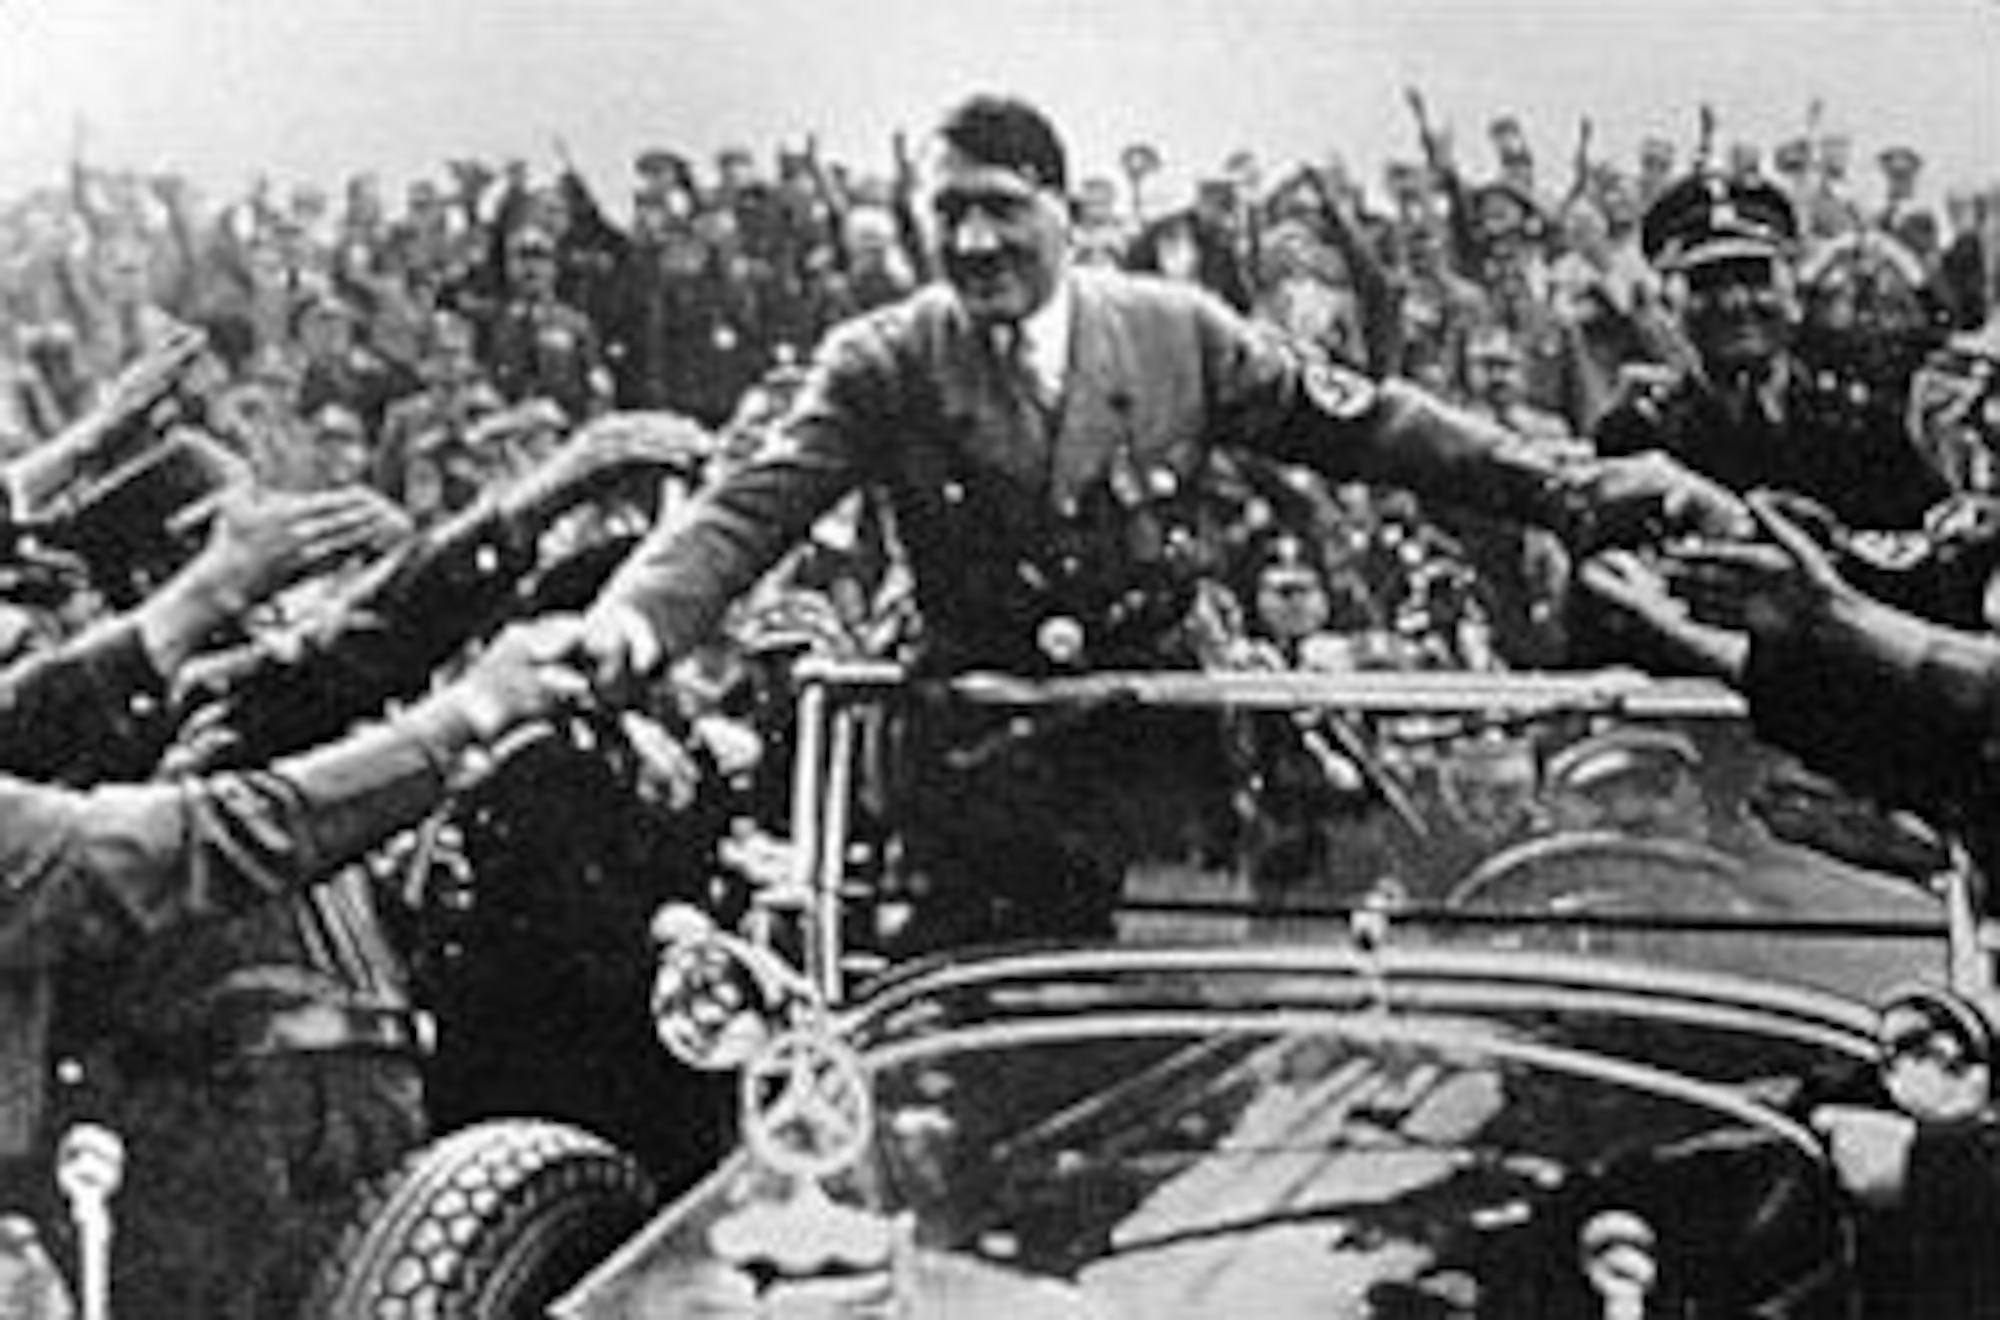 Adolf Hitler at the time he came to power in 1933. At this early period, many considered him a buffoon, not to be taken seriously. It was not many years before the world realized his full intentions. (U.S. Air Force photo)